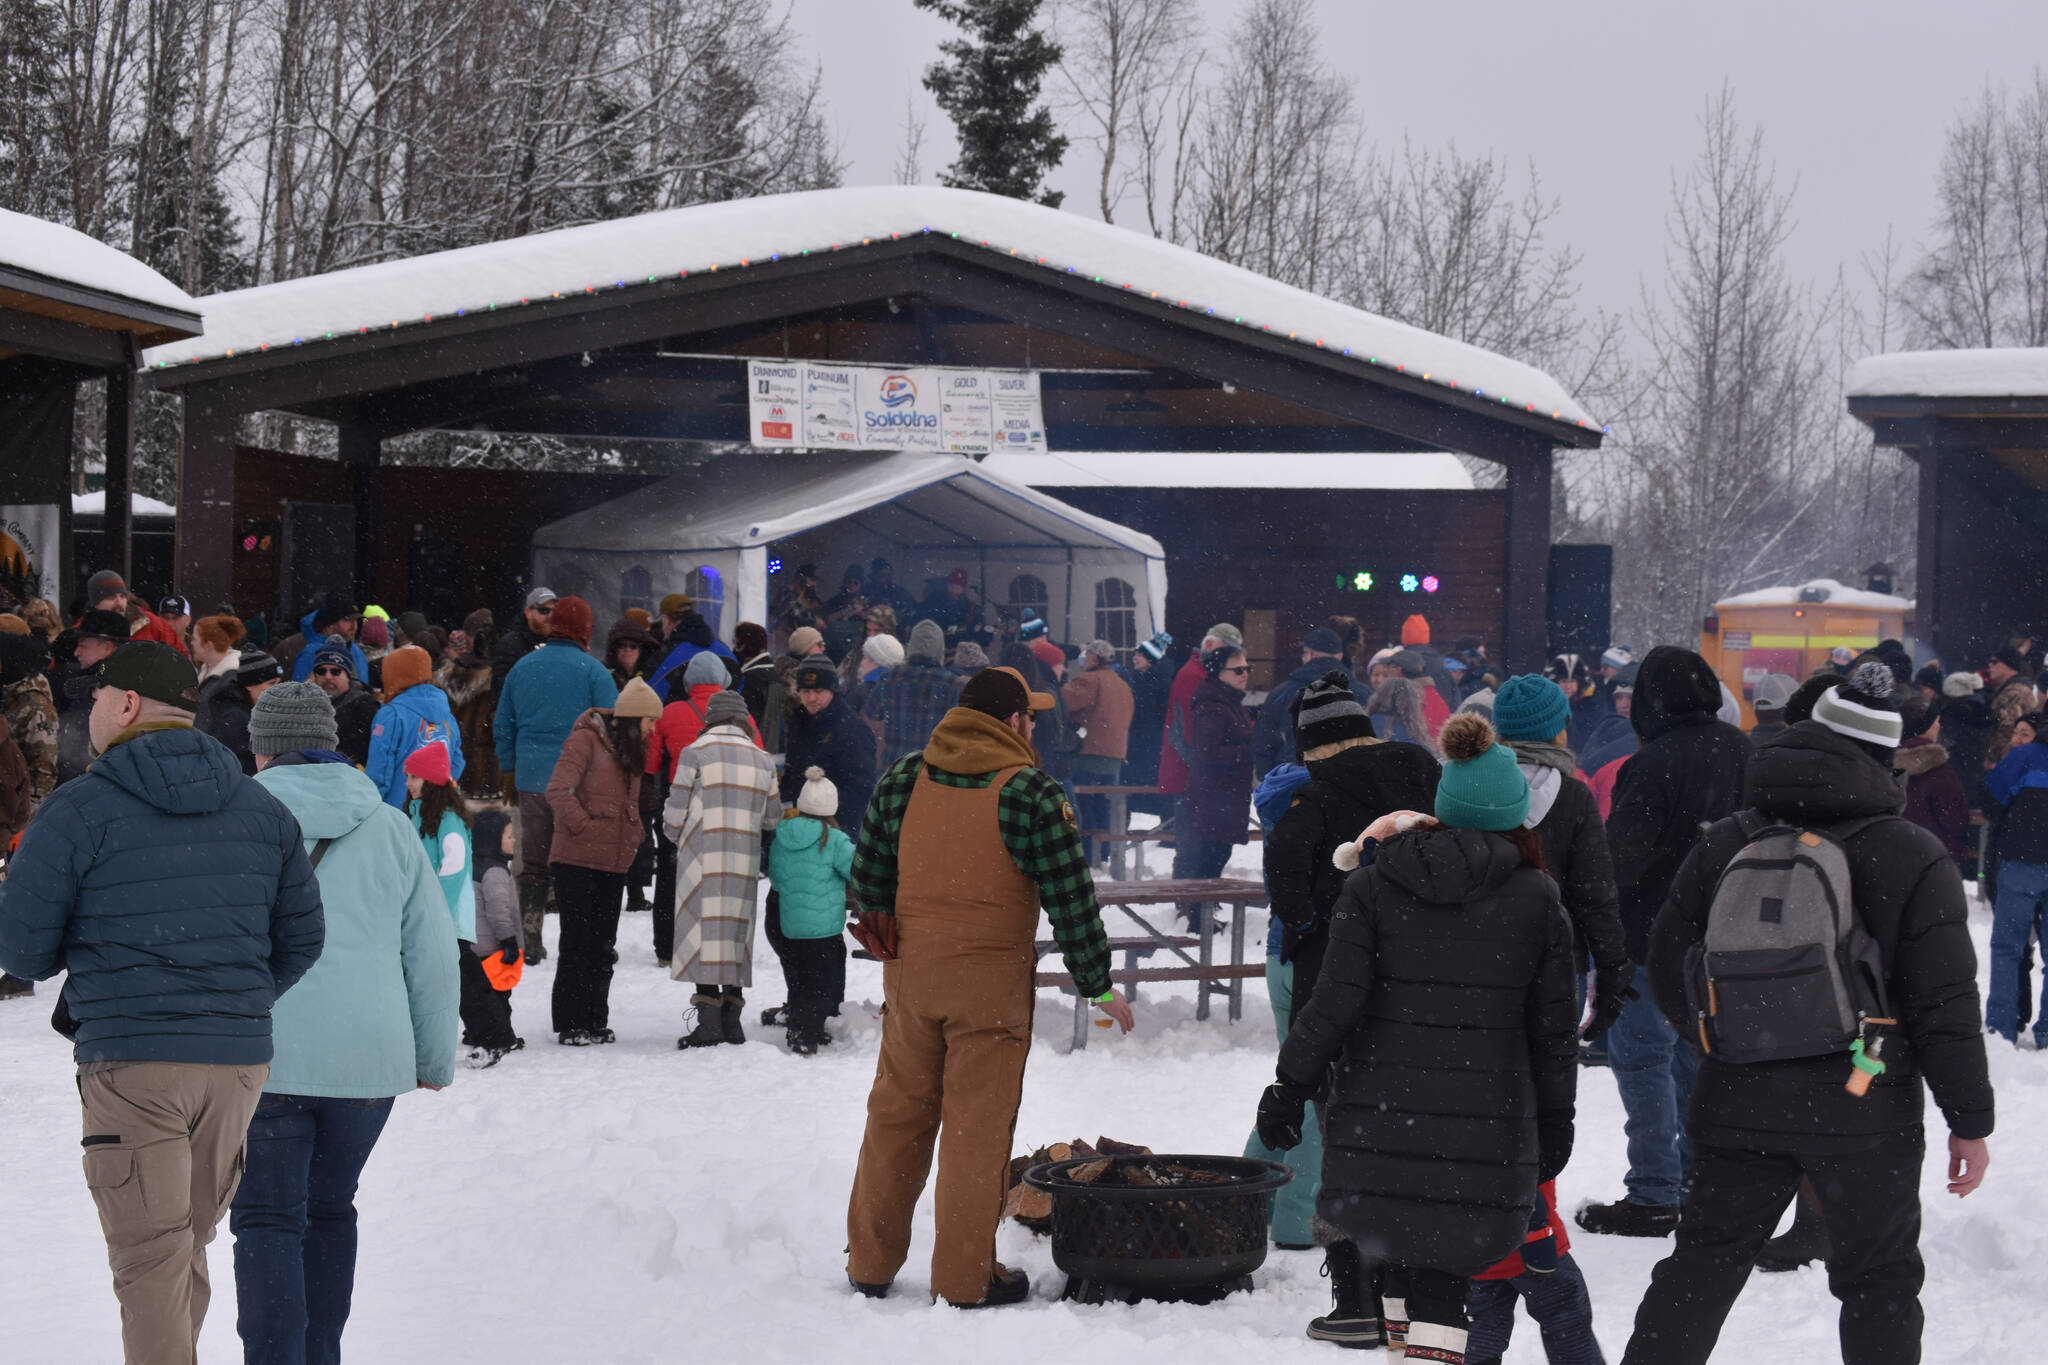 Snow falls as attendees of Frozen RiverFest gather around the stage and listen to The Ridgeway Rounders on Saturday, Feb. 18, 2023 at Soldotna Creek Park in Soldotna, Alaska. (Jake Dye/Peninsula Clarion)